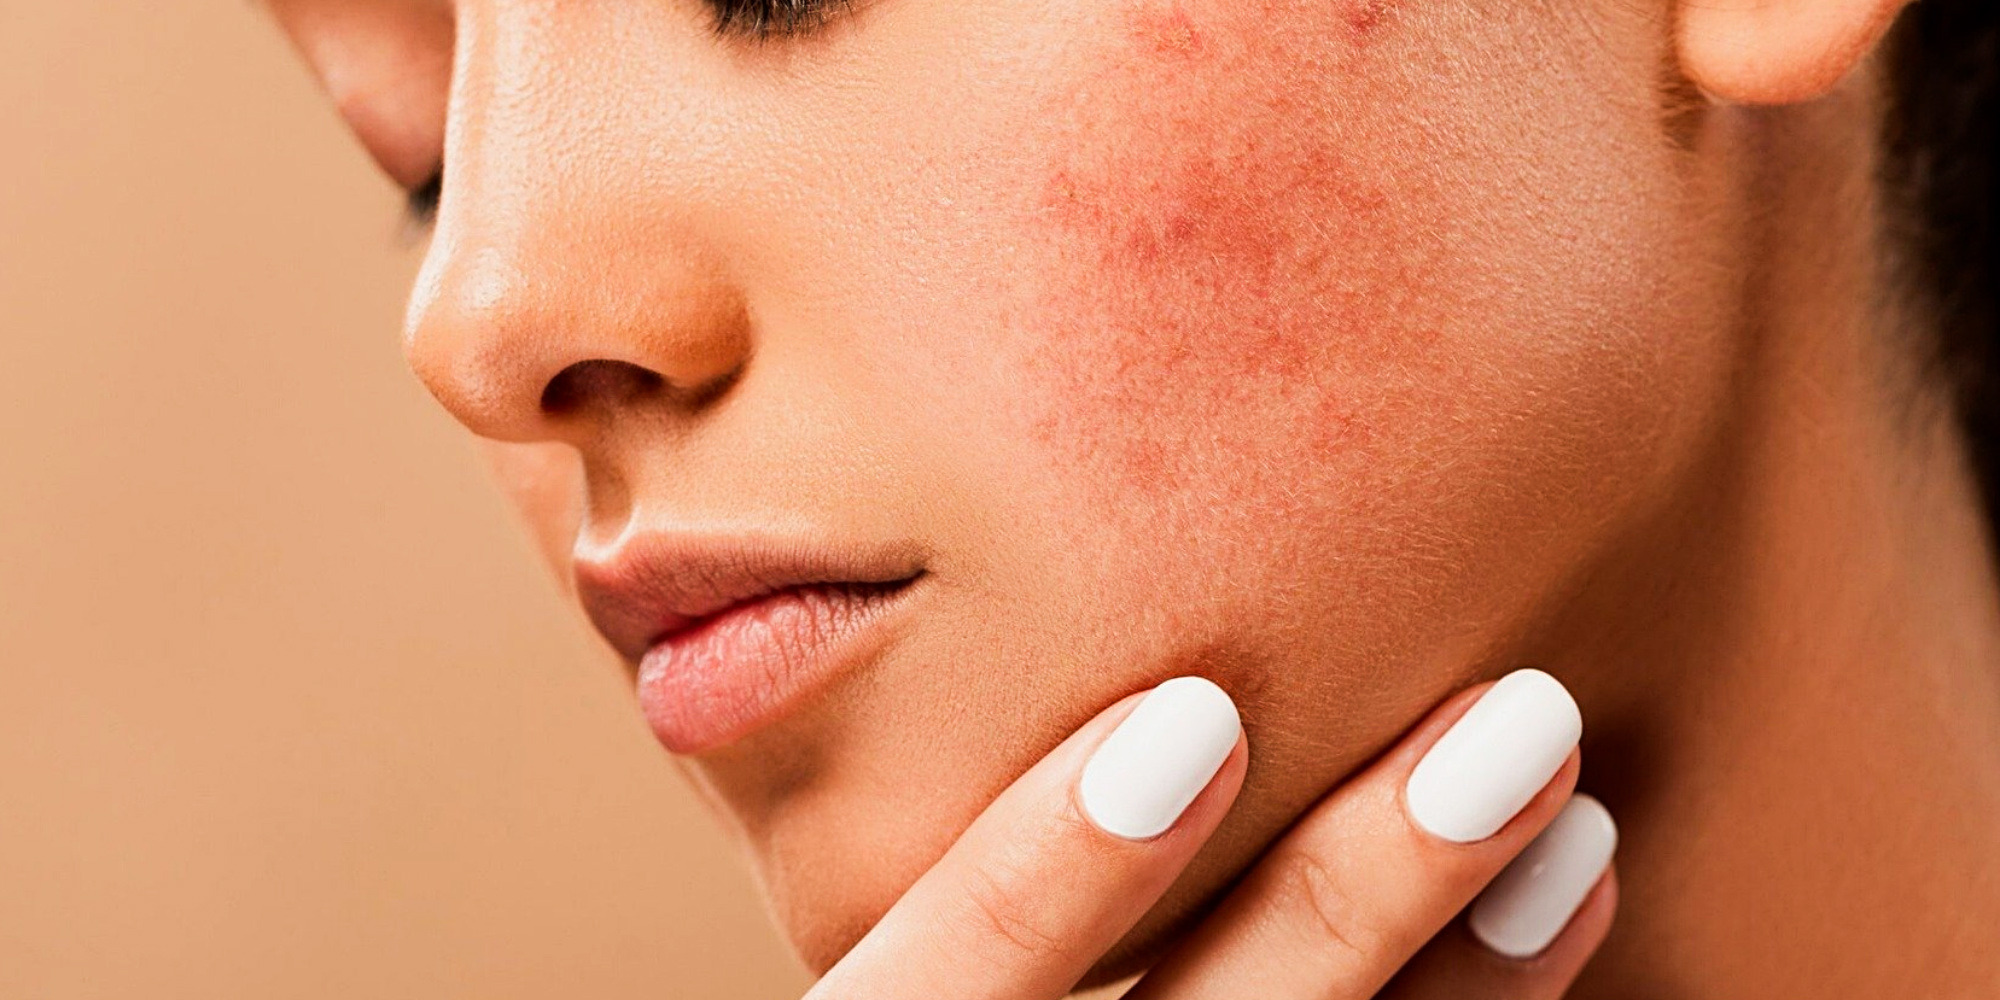 Stop using tretinoin and consult a doctor if skin irritation